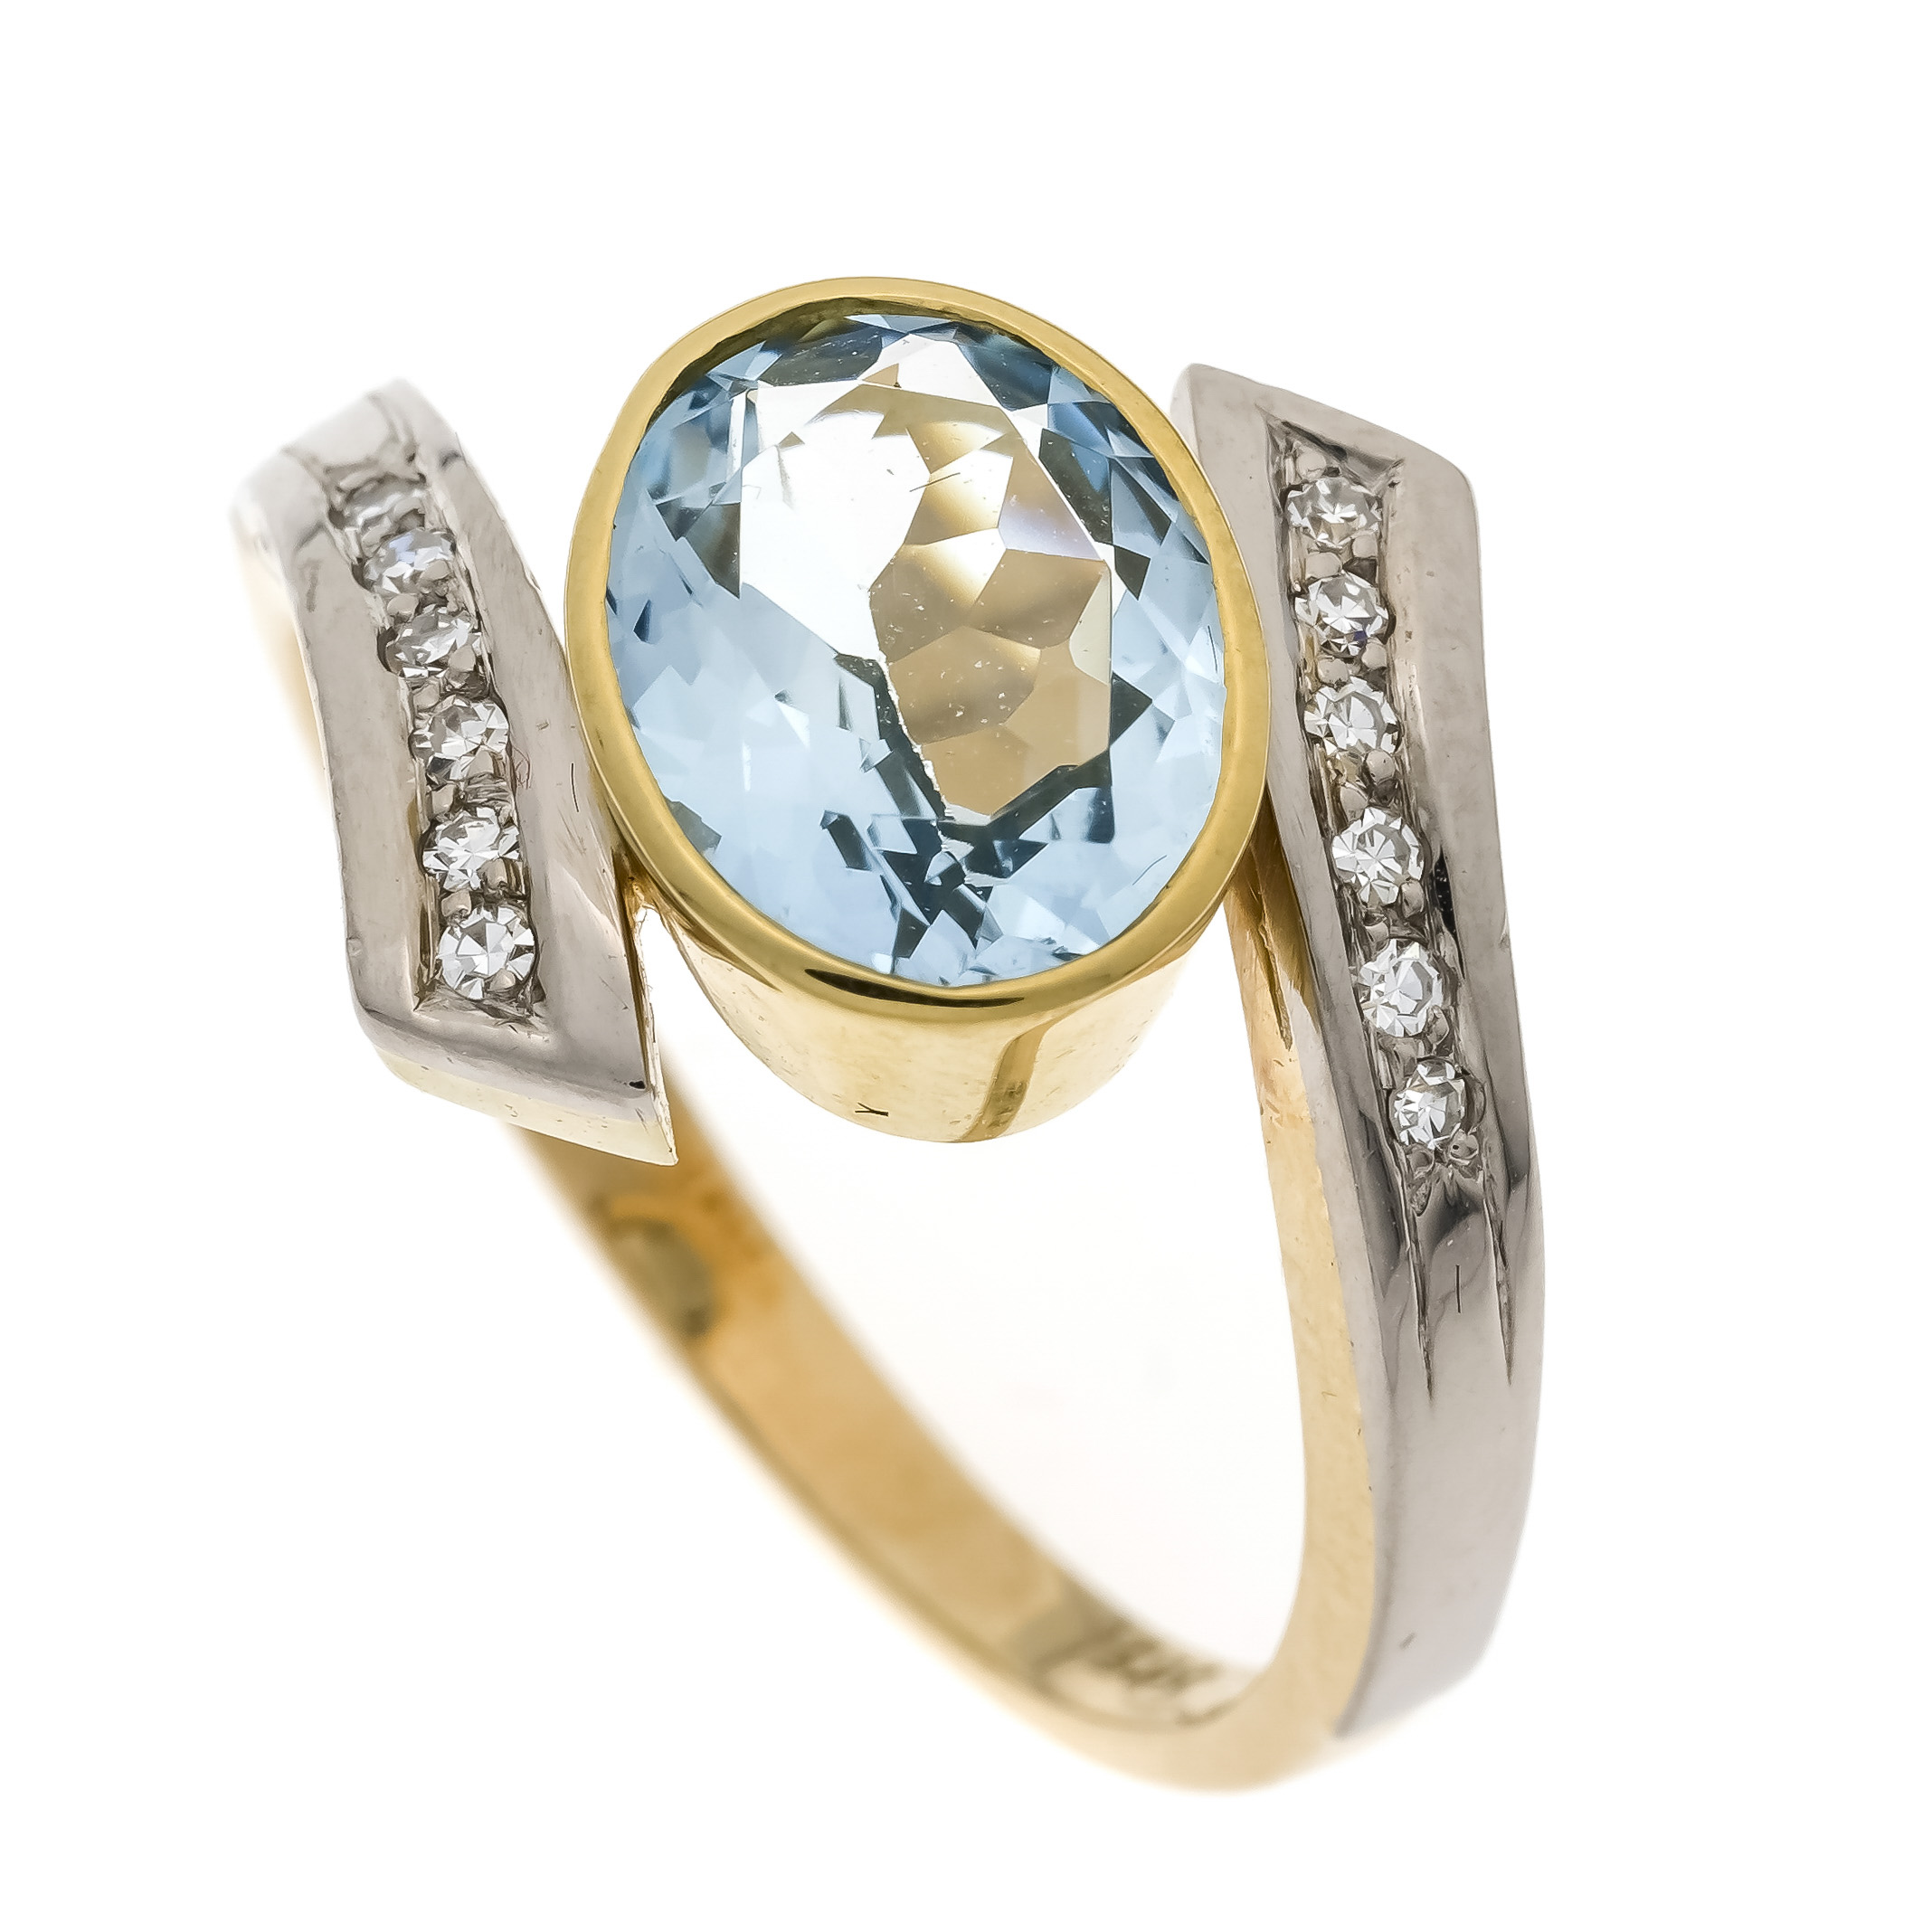 Aquamarine diamond ring GG/WG 585/000 with an oval faceted aquamarine 10 x 8 mm in good color,